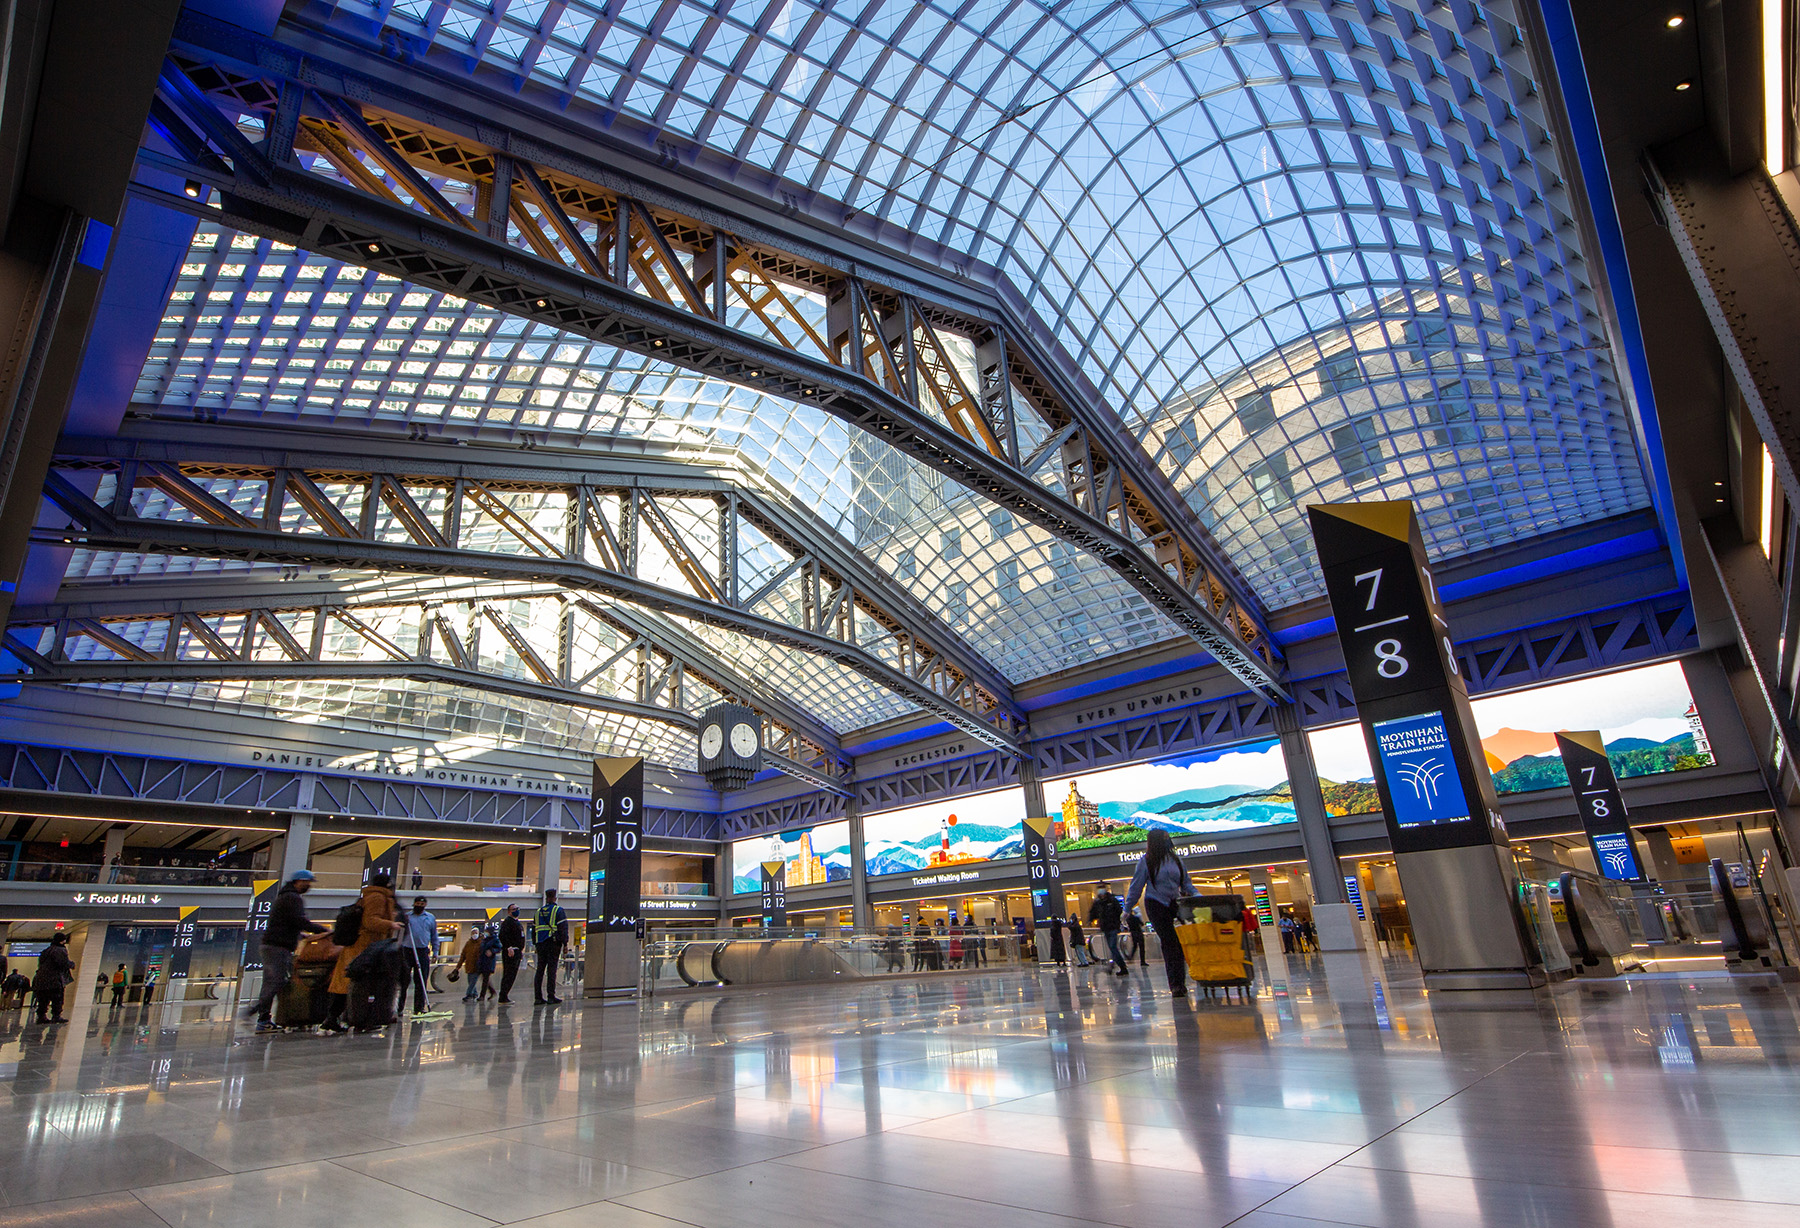 A new train hall is revealed showing the sky light supported by latticed steel trusses, open atrium, kiosks, and people with their luggage.